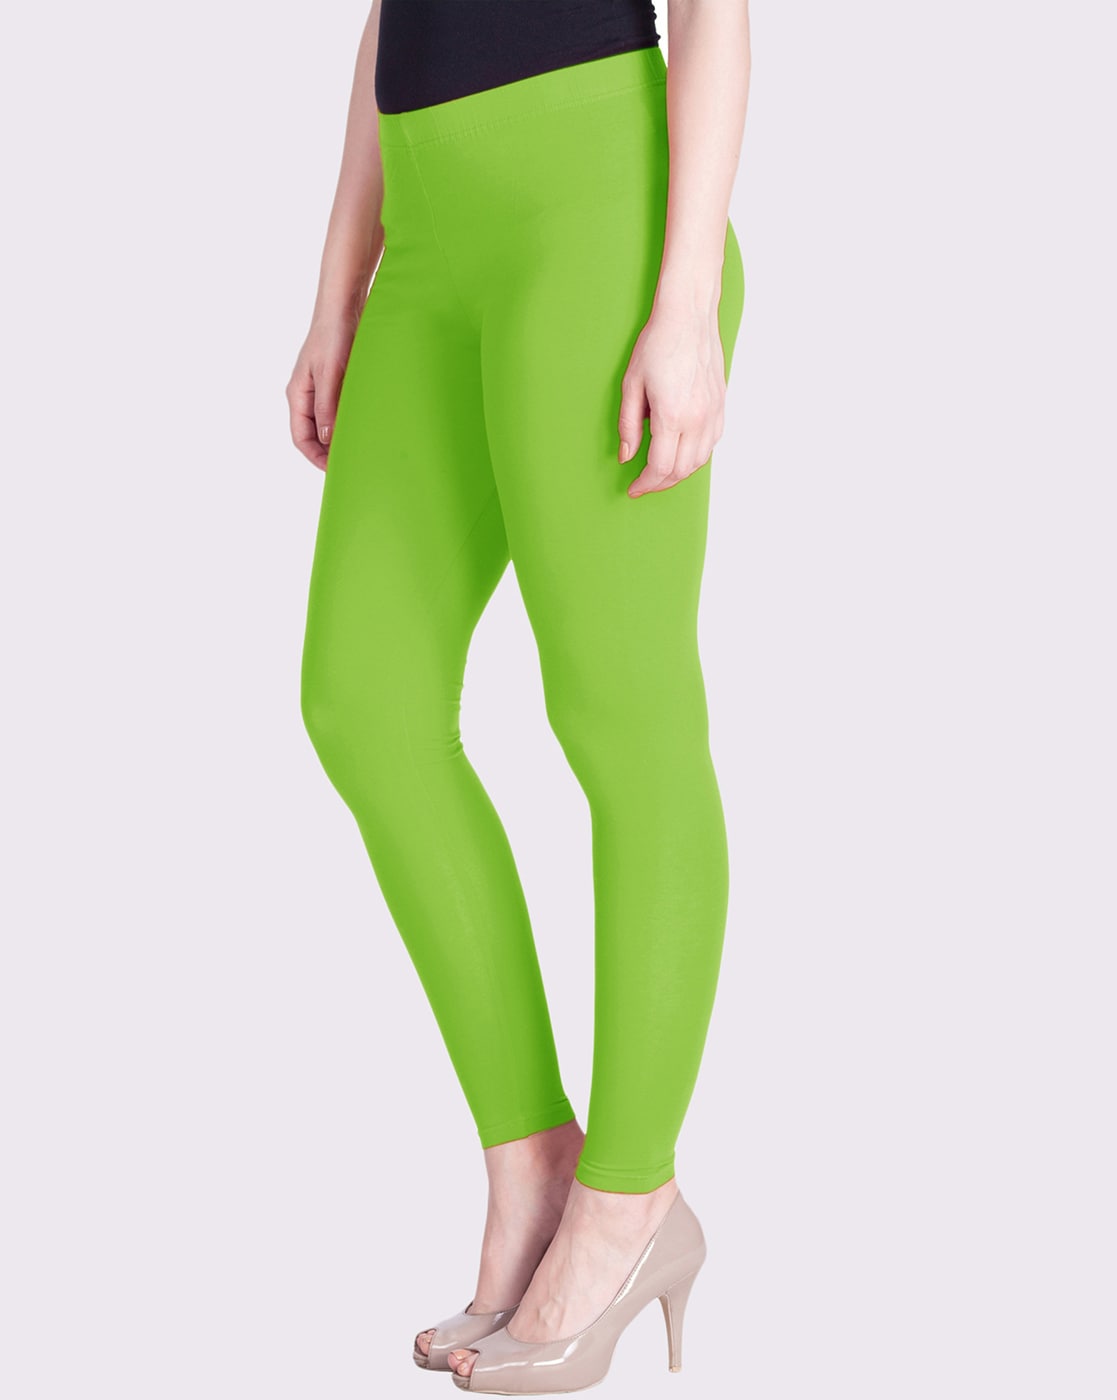 Exclusive New Best Proven Sexy Bright Look Green Leggings - What Devotion❓  - Coolest Online Fashion Trends